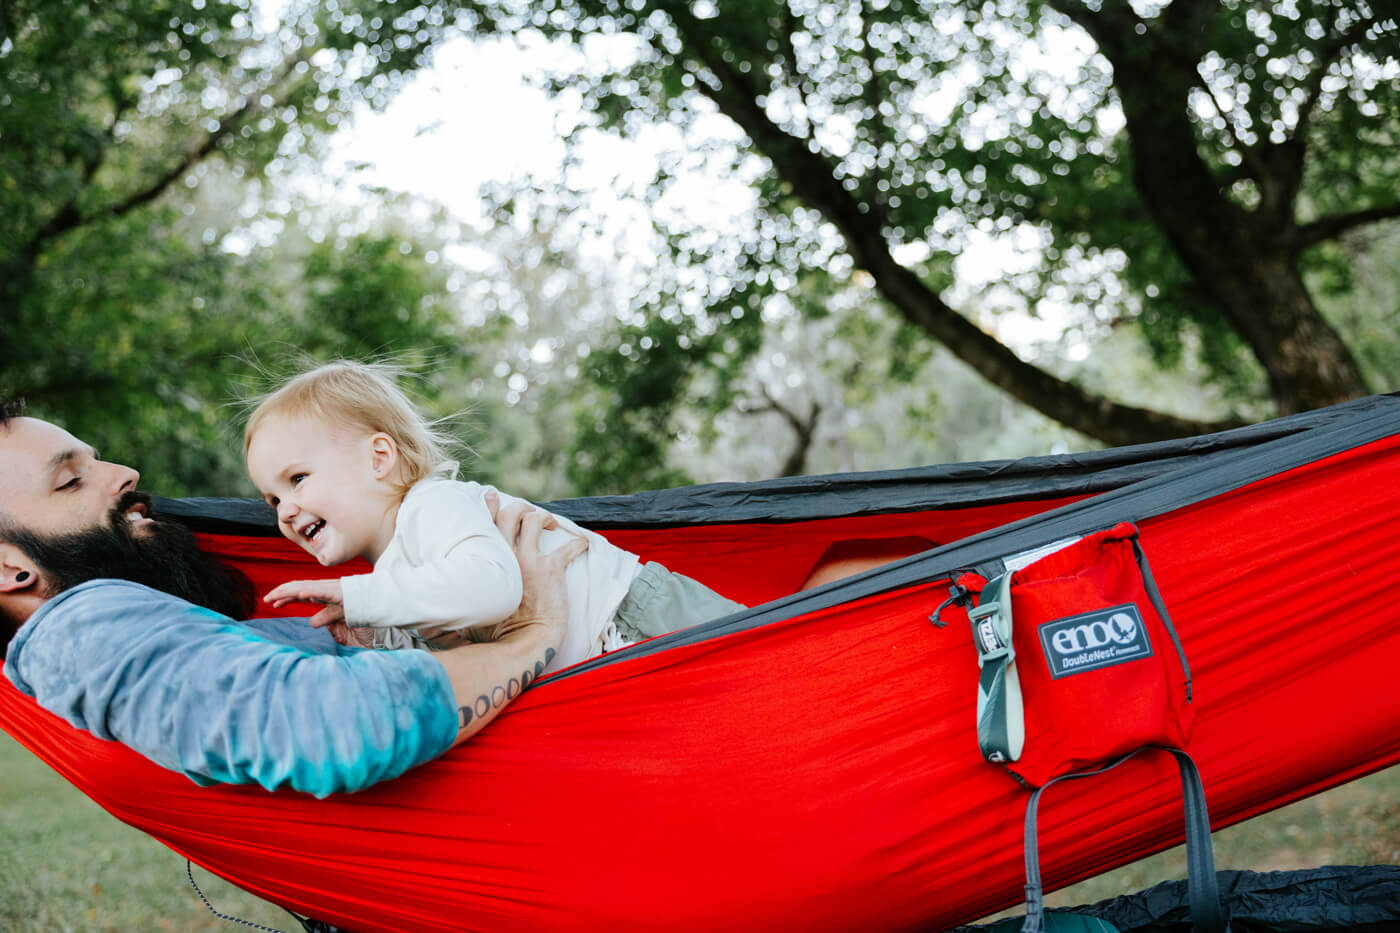 A man plays with his kid while laying in a red ENO hammock together